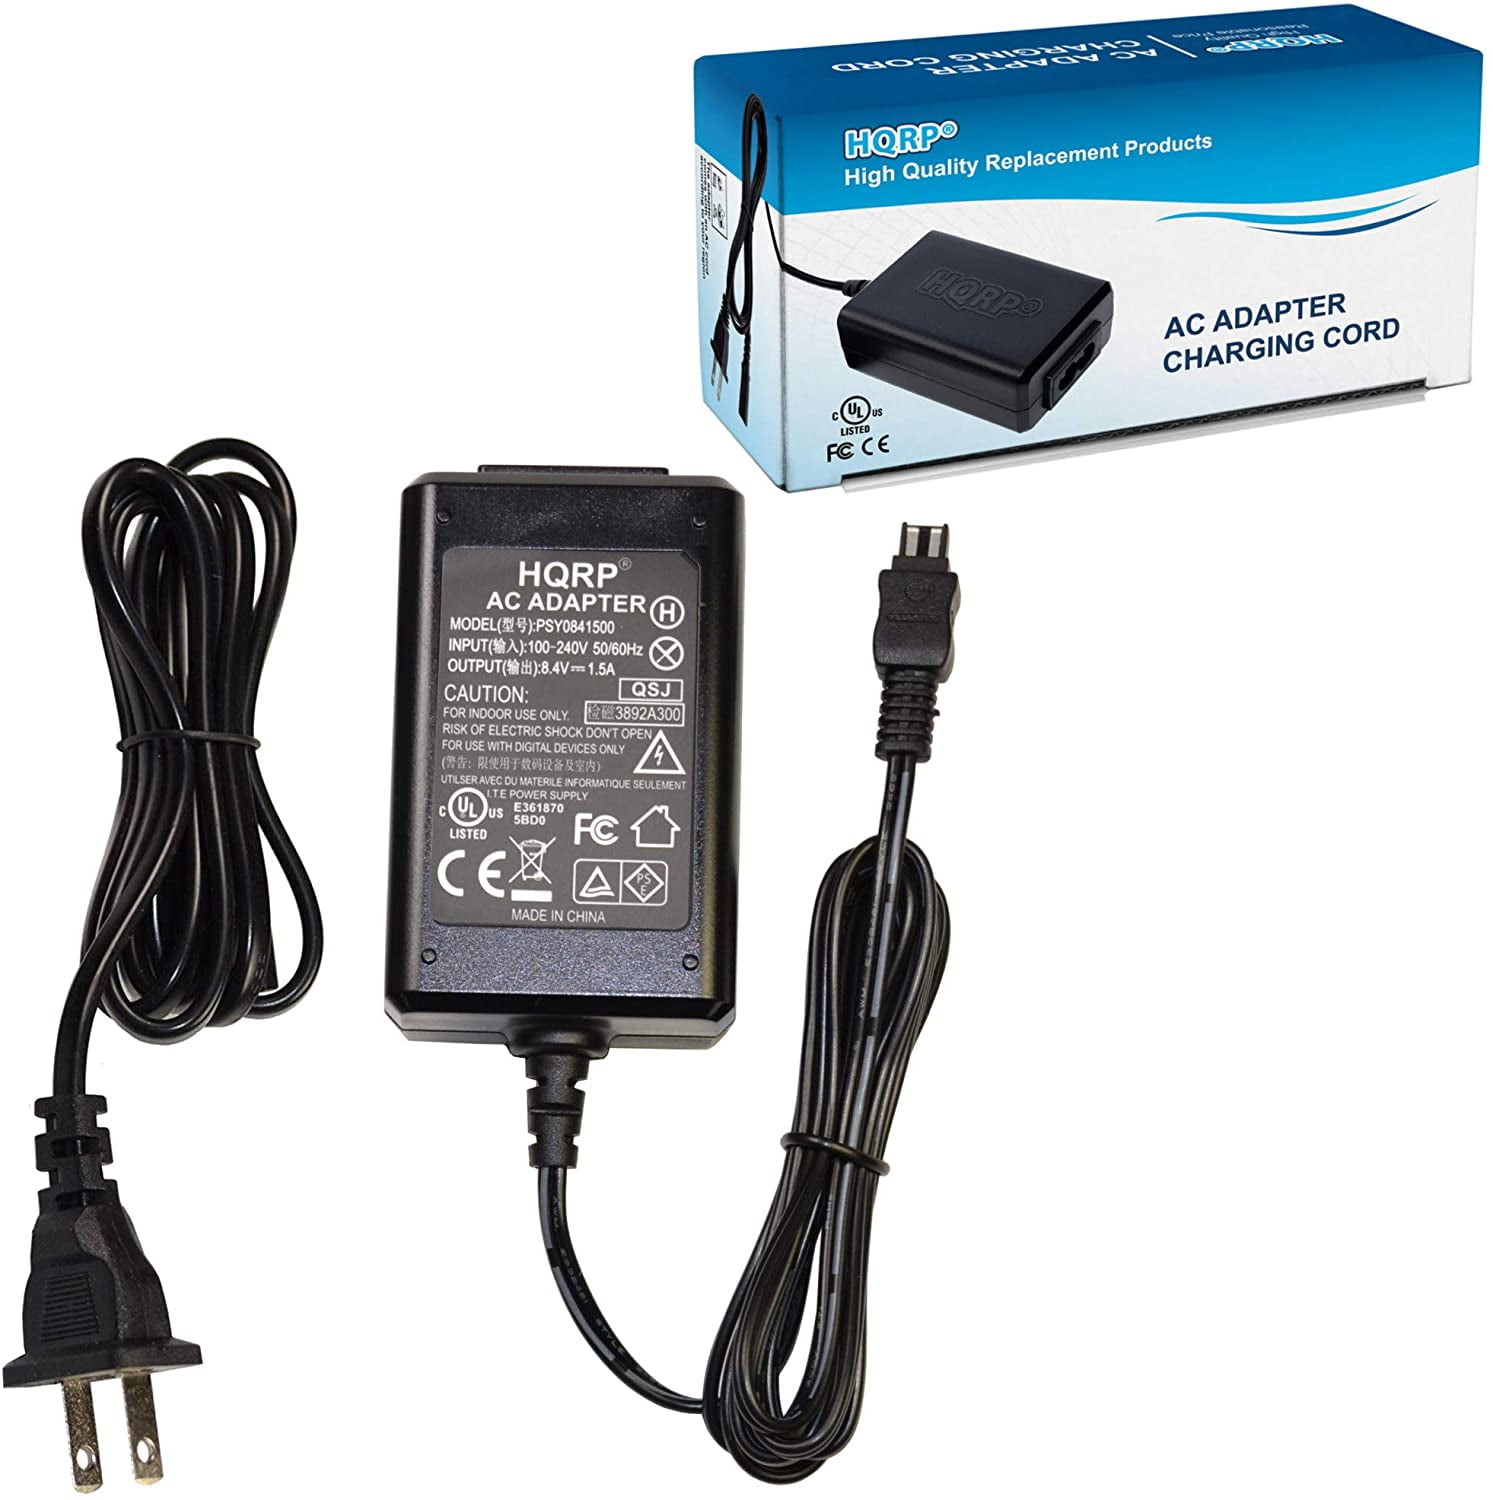 Sony miniDV Handycam Camcorder DCR-TRV130 power supply cord ac adapter charger 